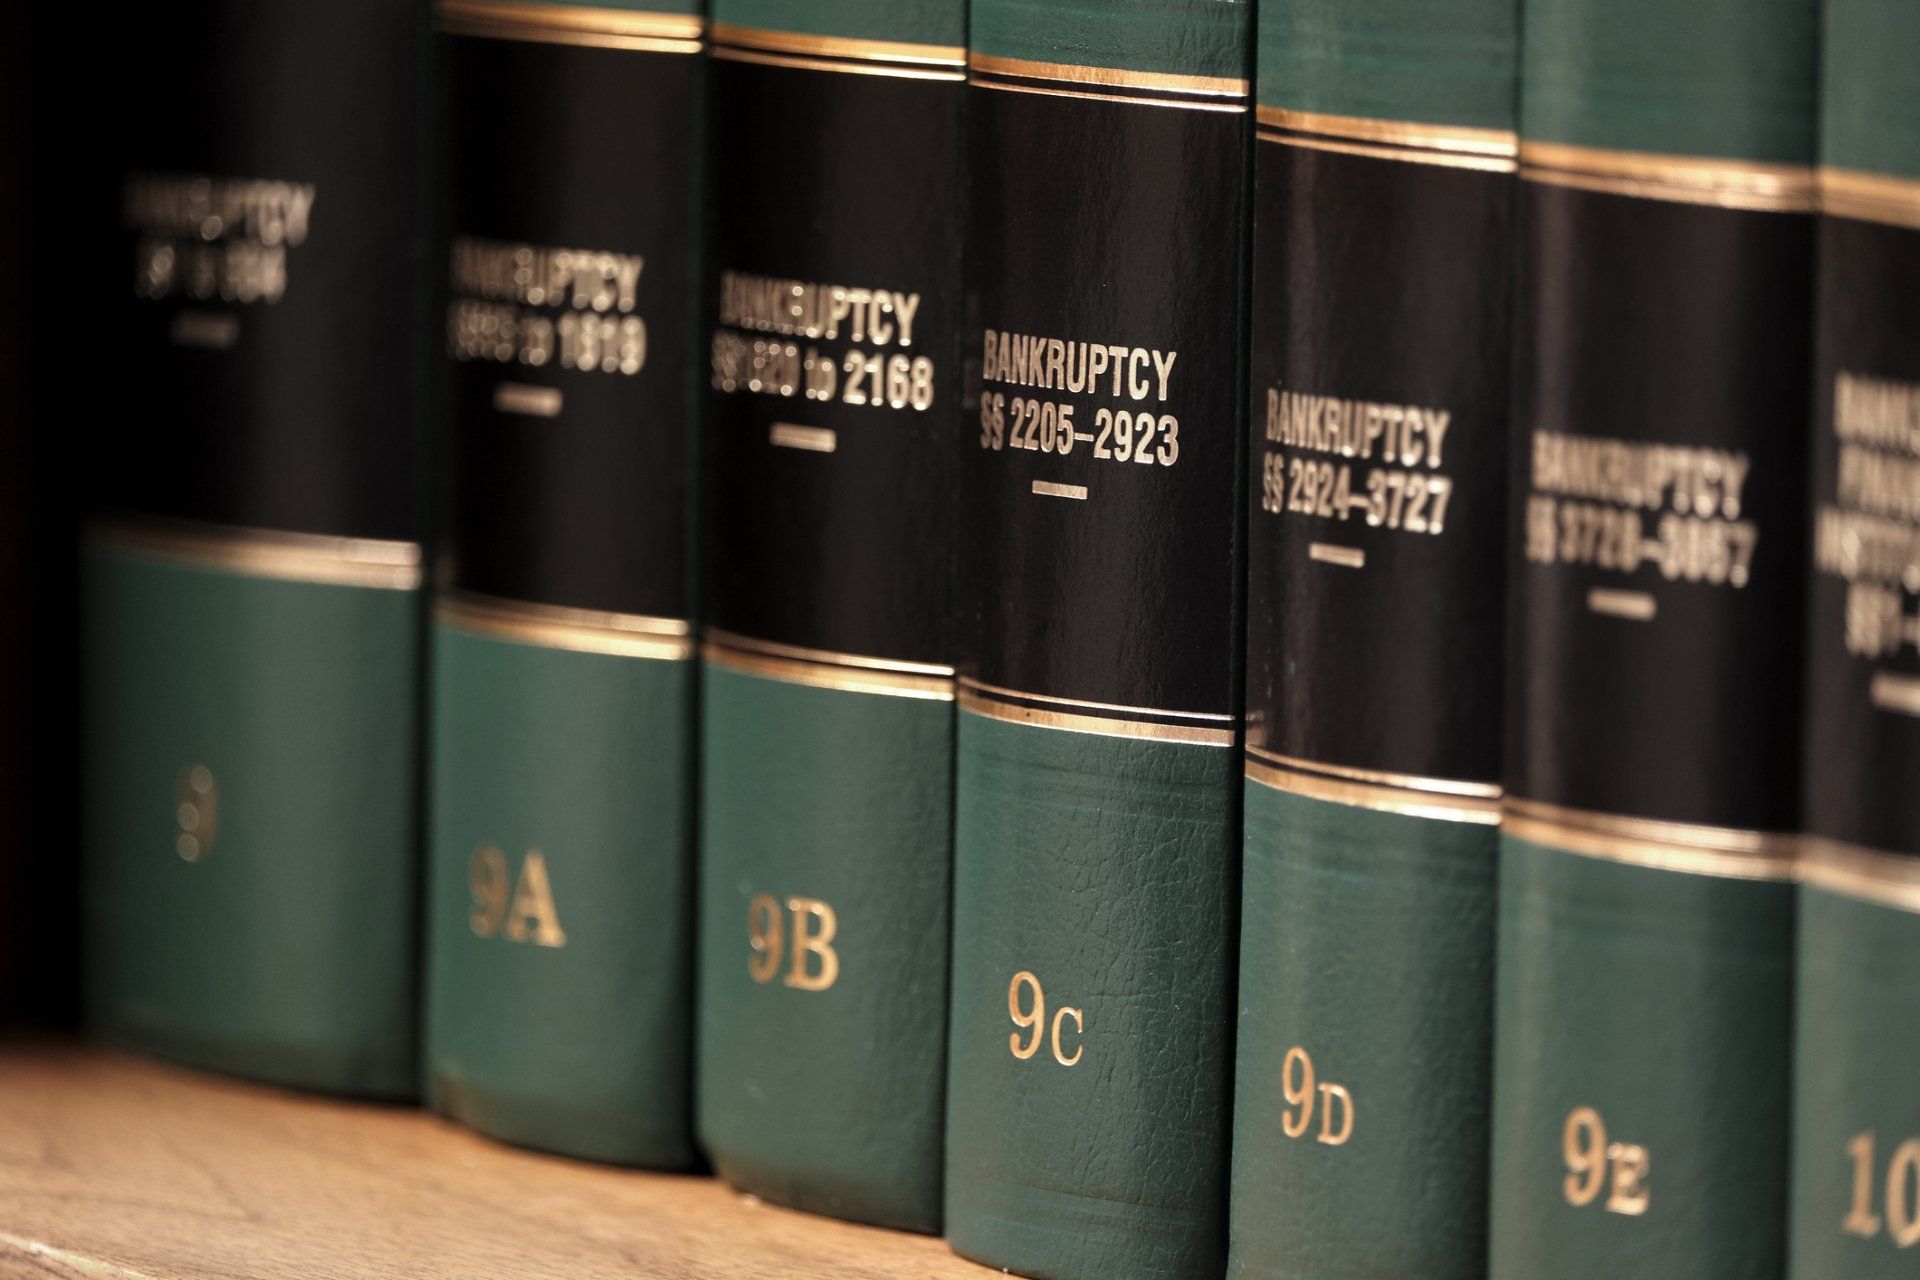 Bankruptcy Books with it R.A. Number - New Port Richey, FL - The Stephenson Law Firm P.A.